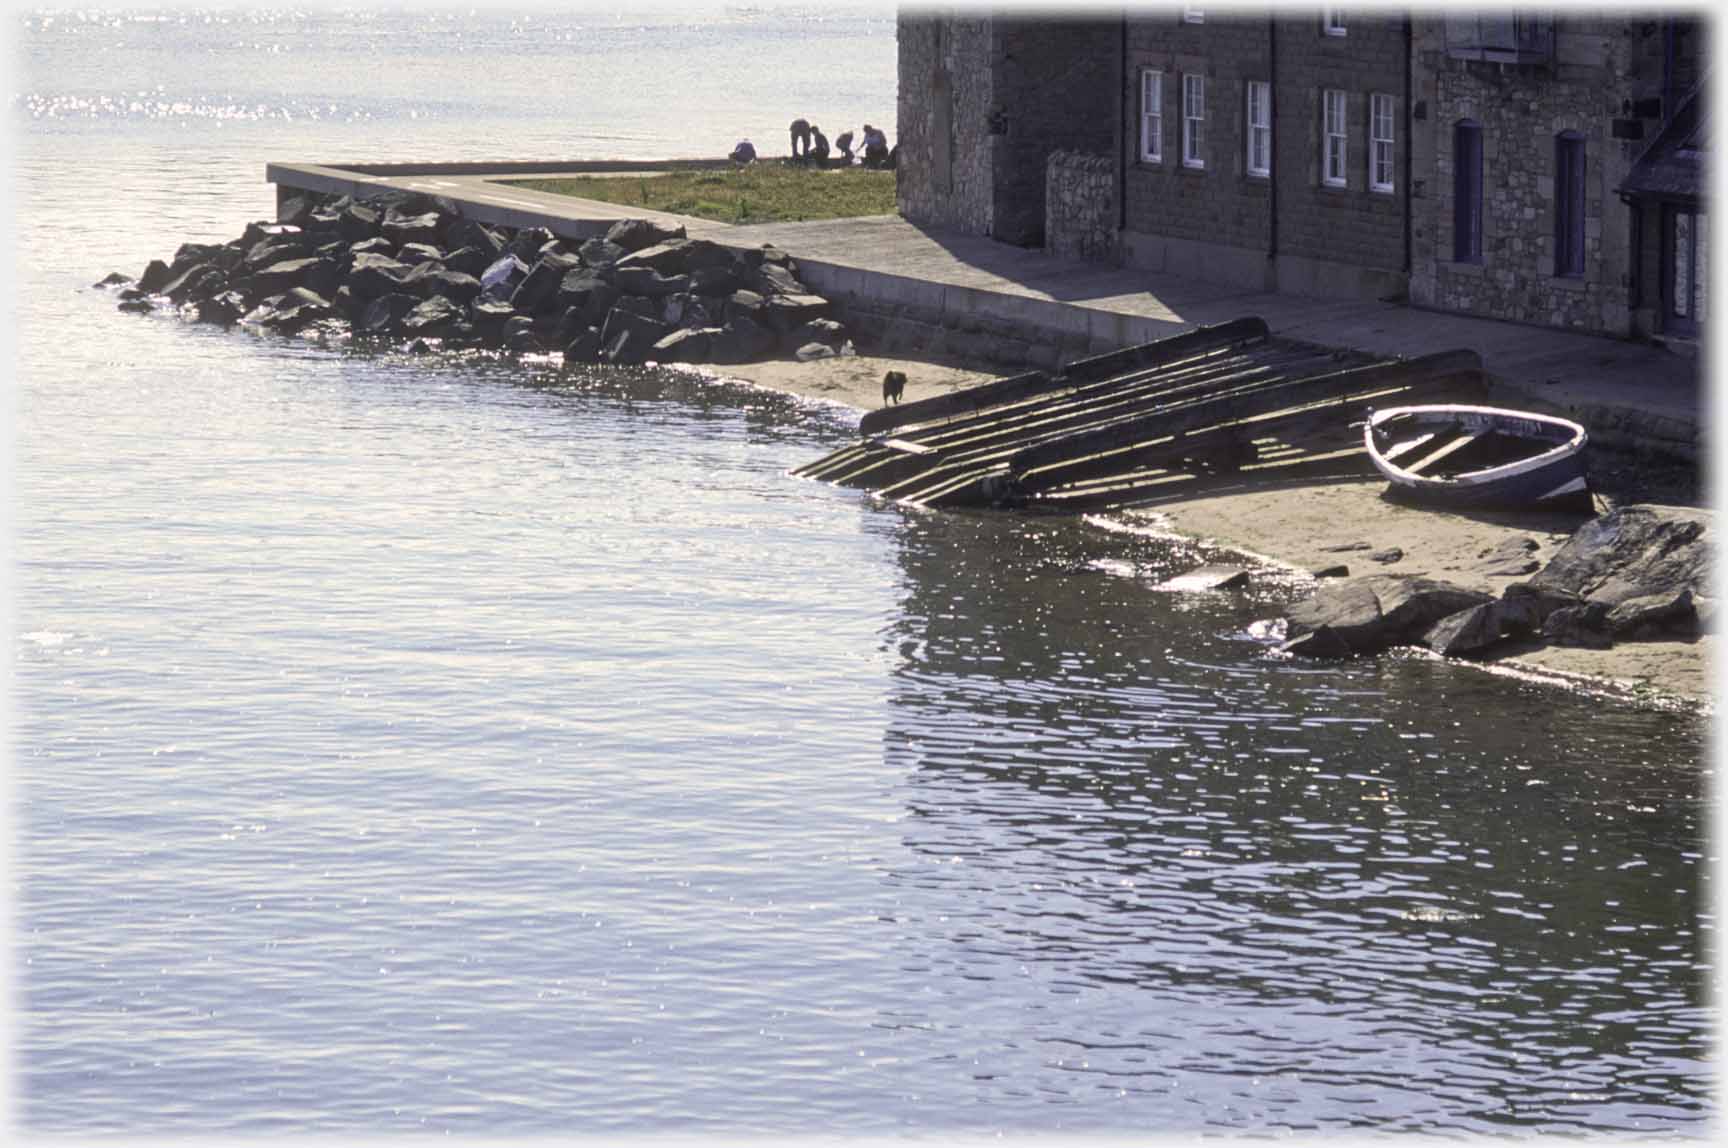 Ramp into water by building and small boat.